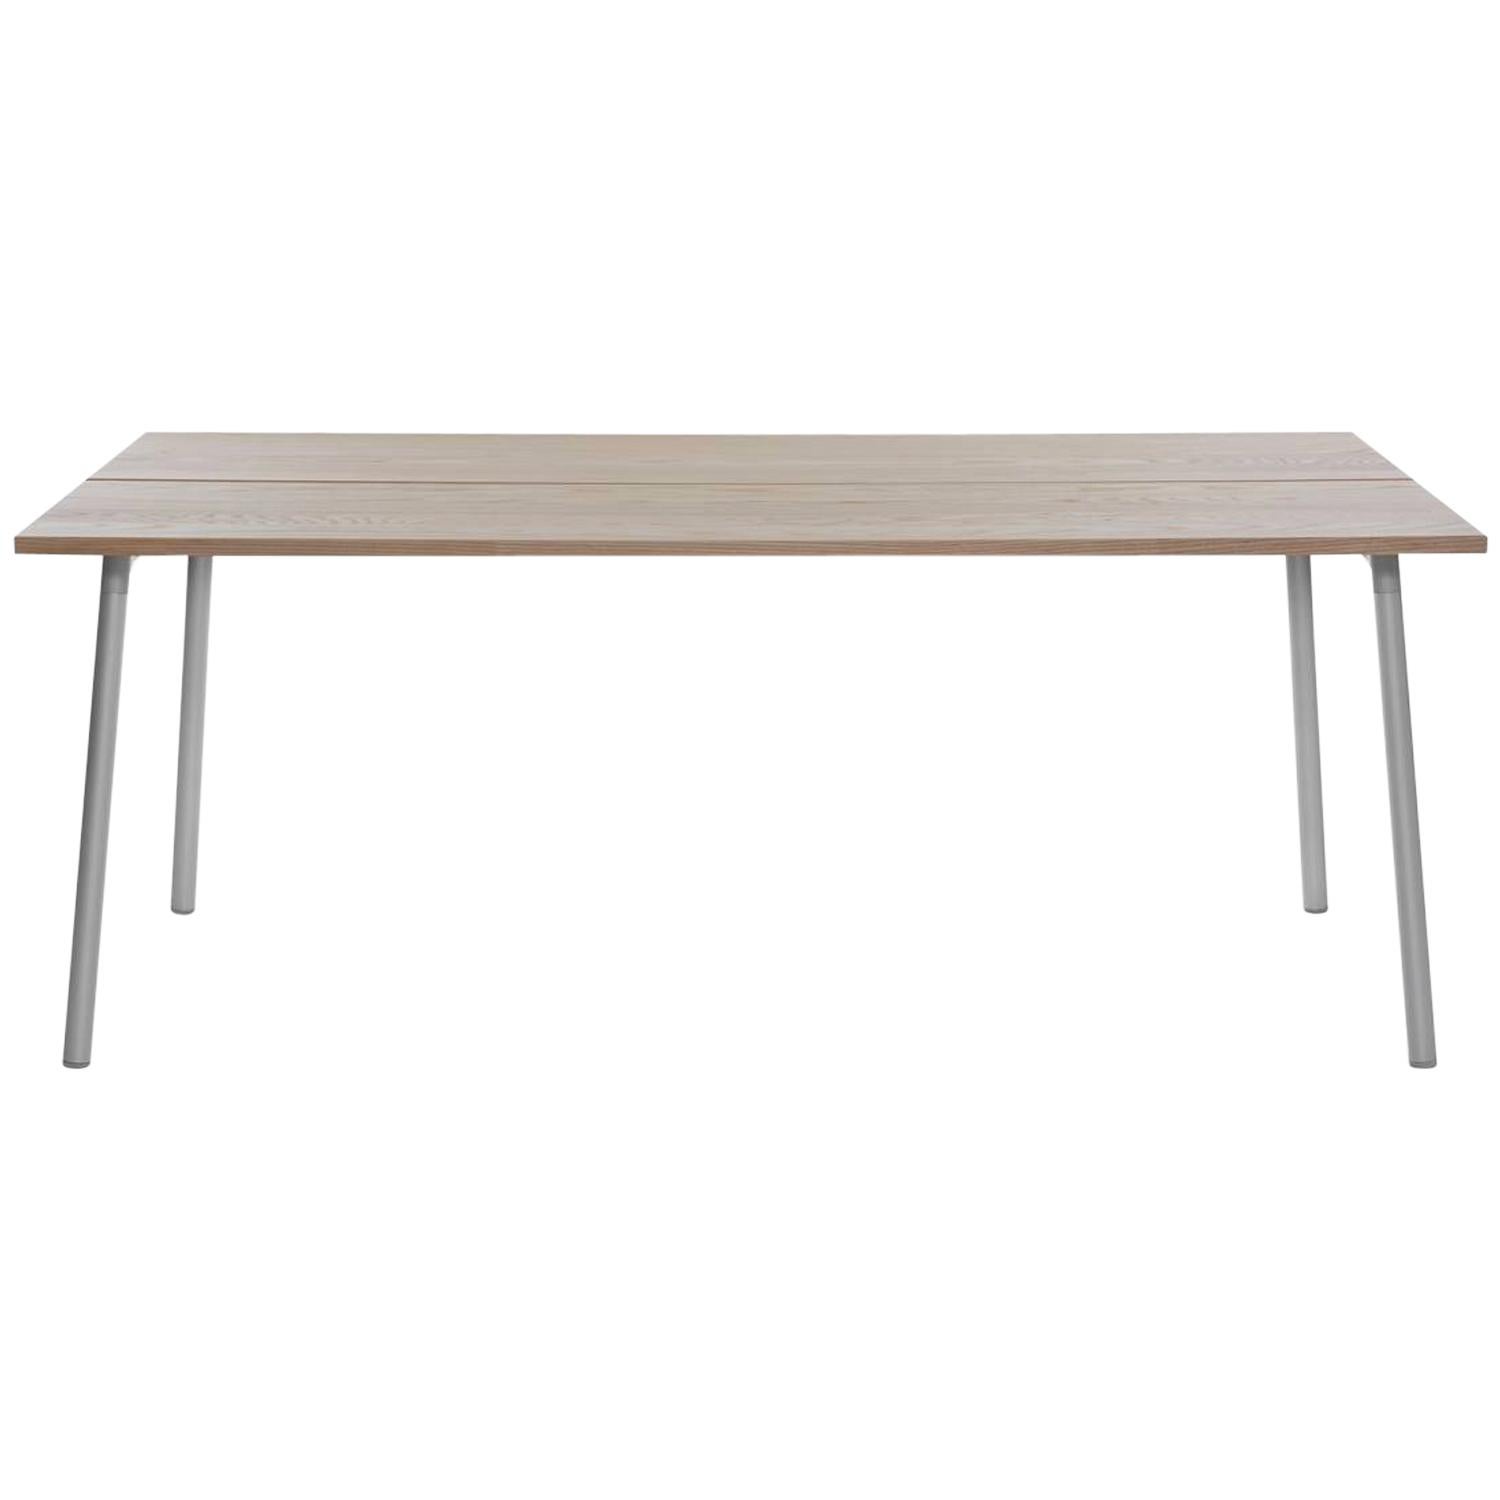 Emeco Run Large Table in Aluminum and Ash by Sam Hecht and Kim Colin For Sale